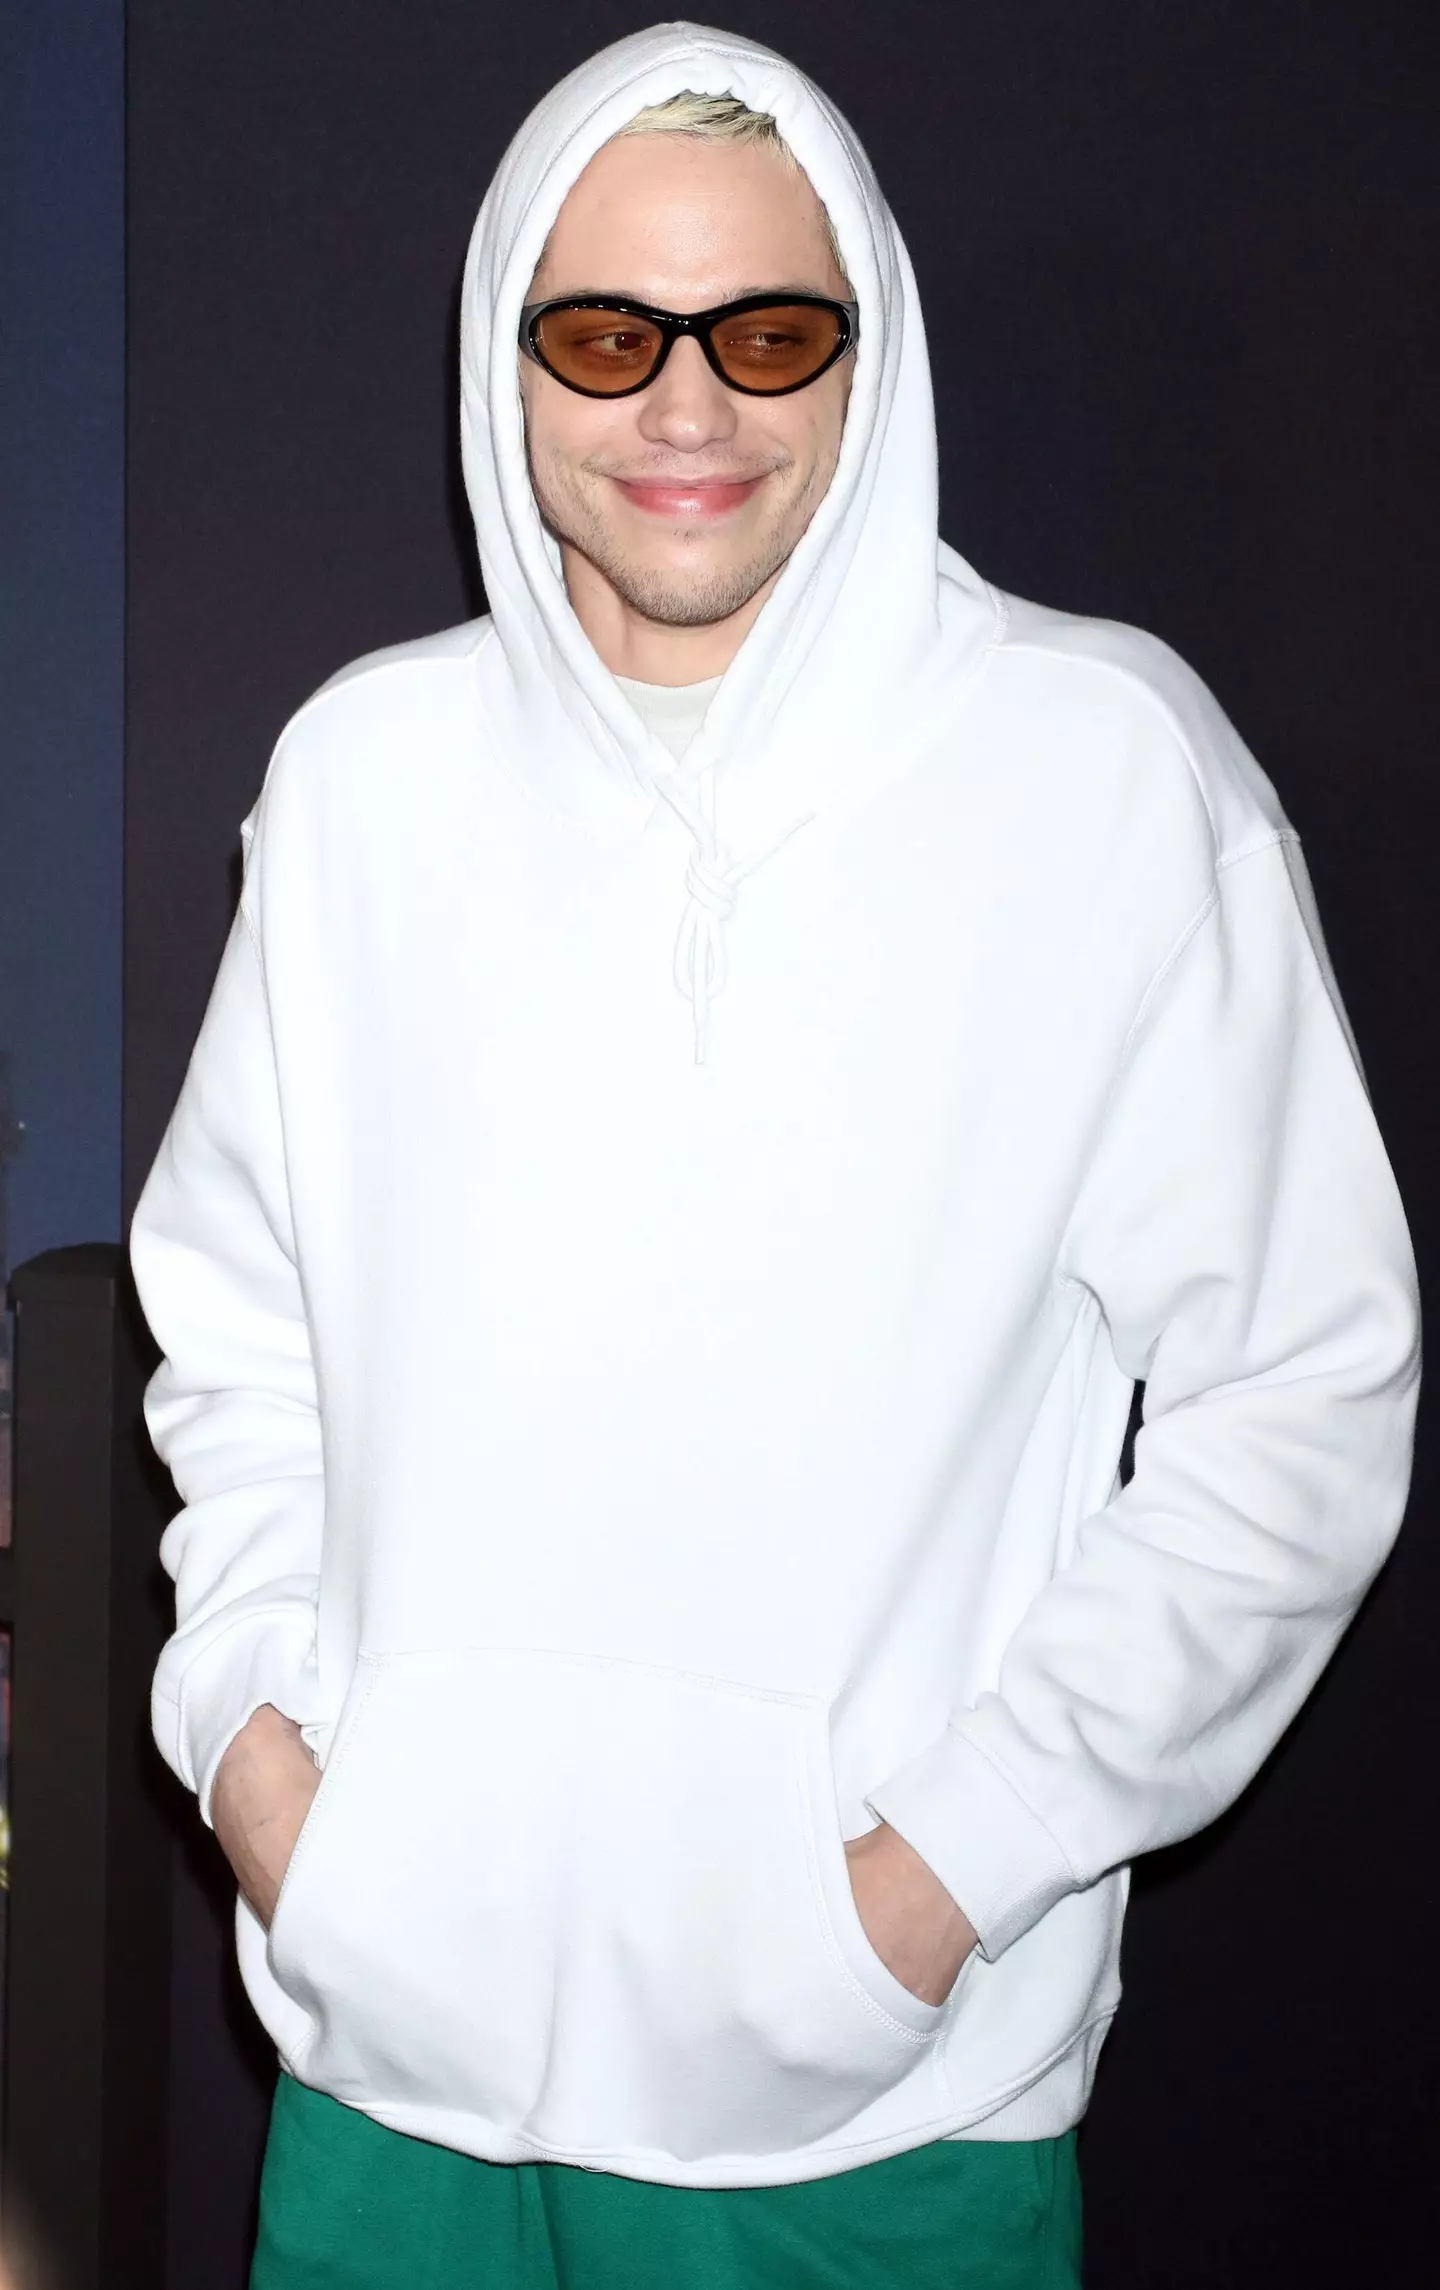 For years, people have wondered about the size of Pete Davidson's dong.